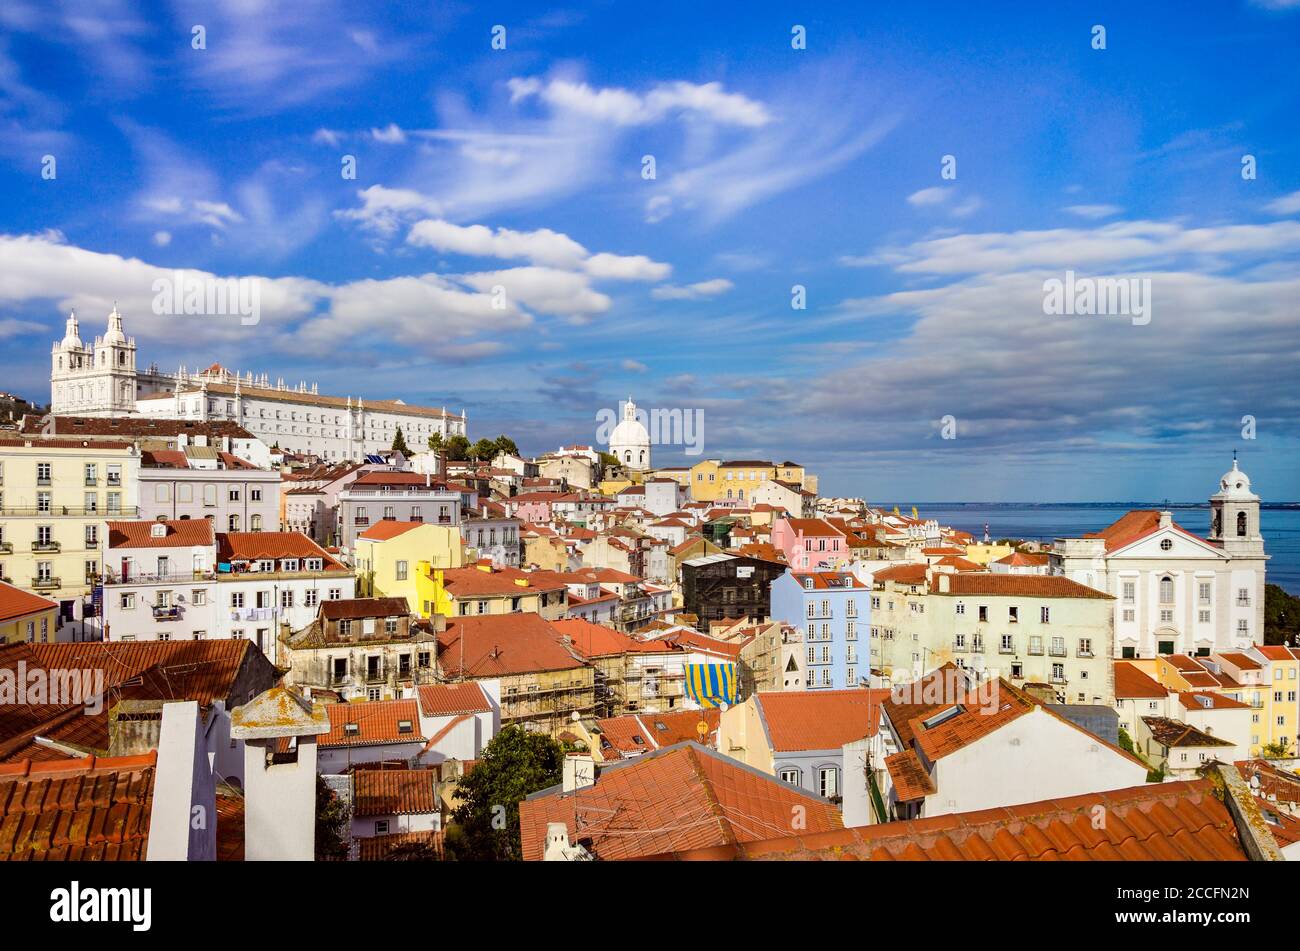 Alfama old town district in Lisbon, Portugal Stock Photo